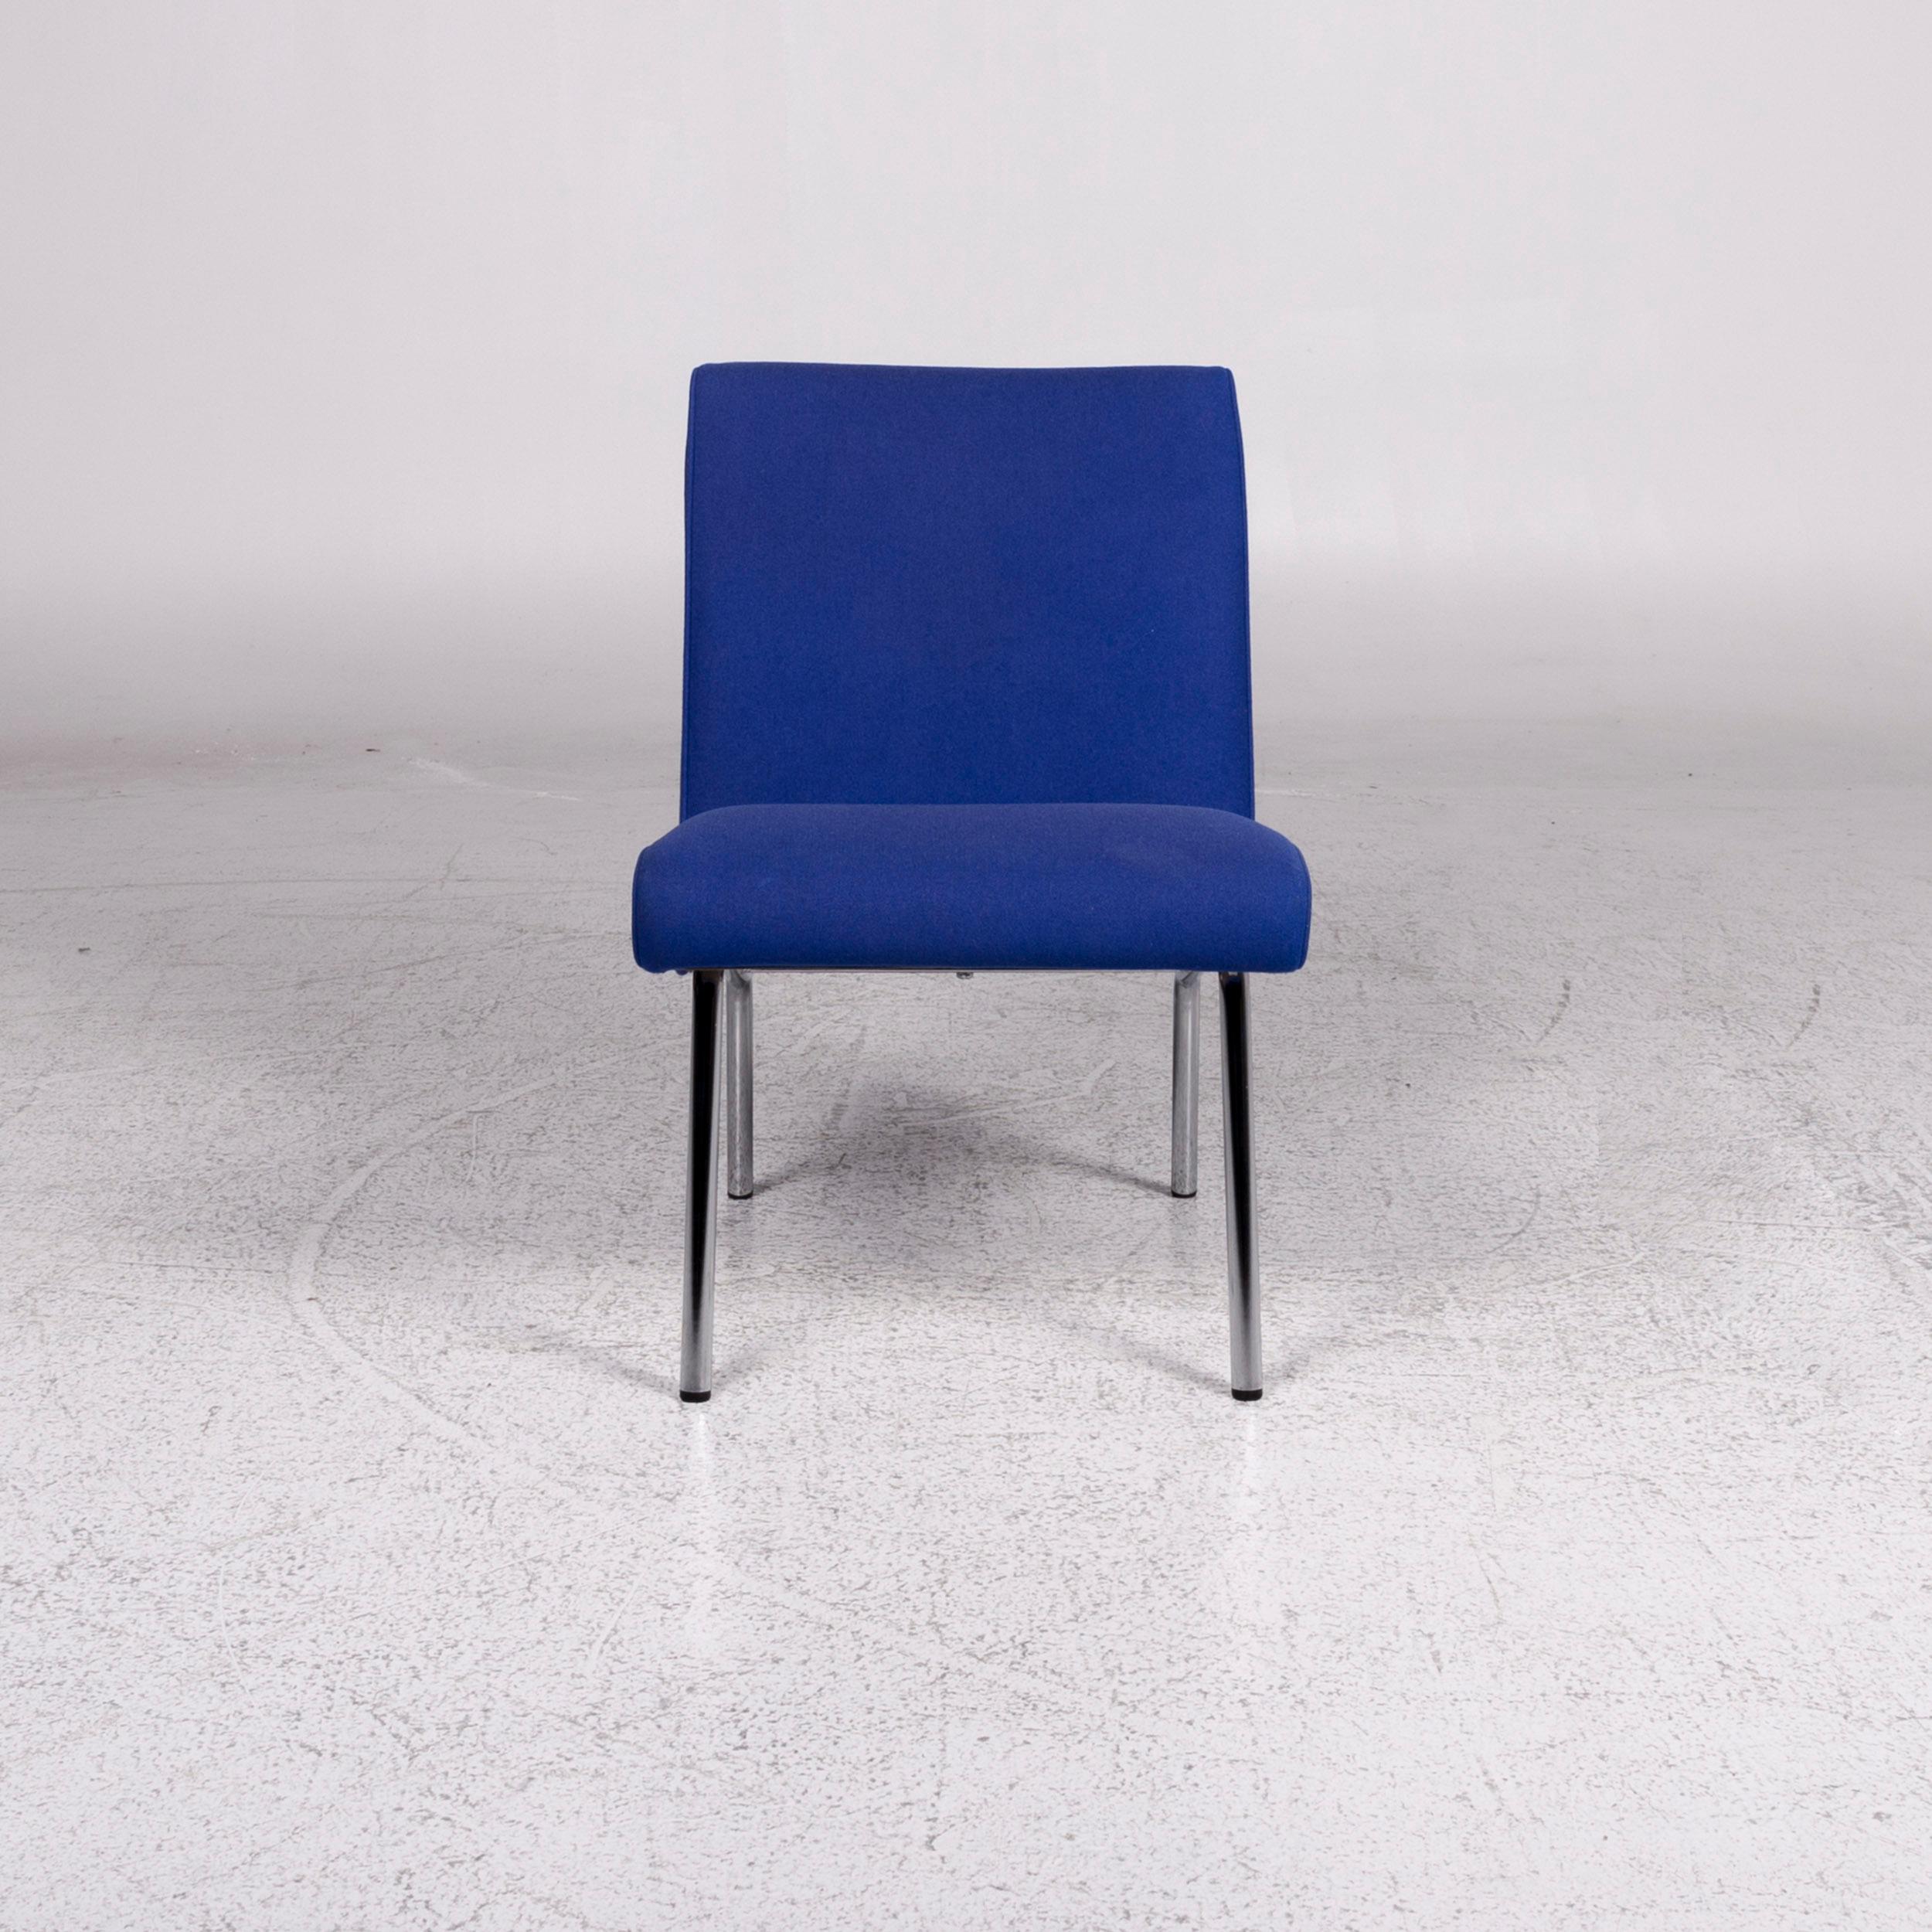 We bring to you a Walter Knoll Vostra fabric armchair blue 4x chair.

 Product measurements in centimeters:
 
Depth: 72
Width: 53
Height: 80
Seat-height: 46
Rest-height:
Seat-depth: 48
Seat-width: 53
Back-height: 41.

 